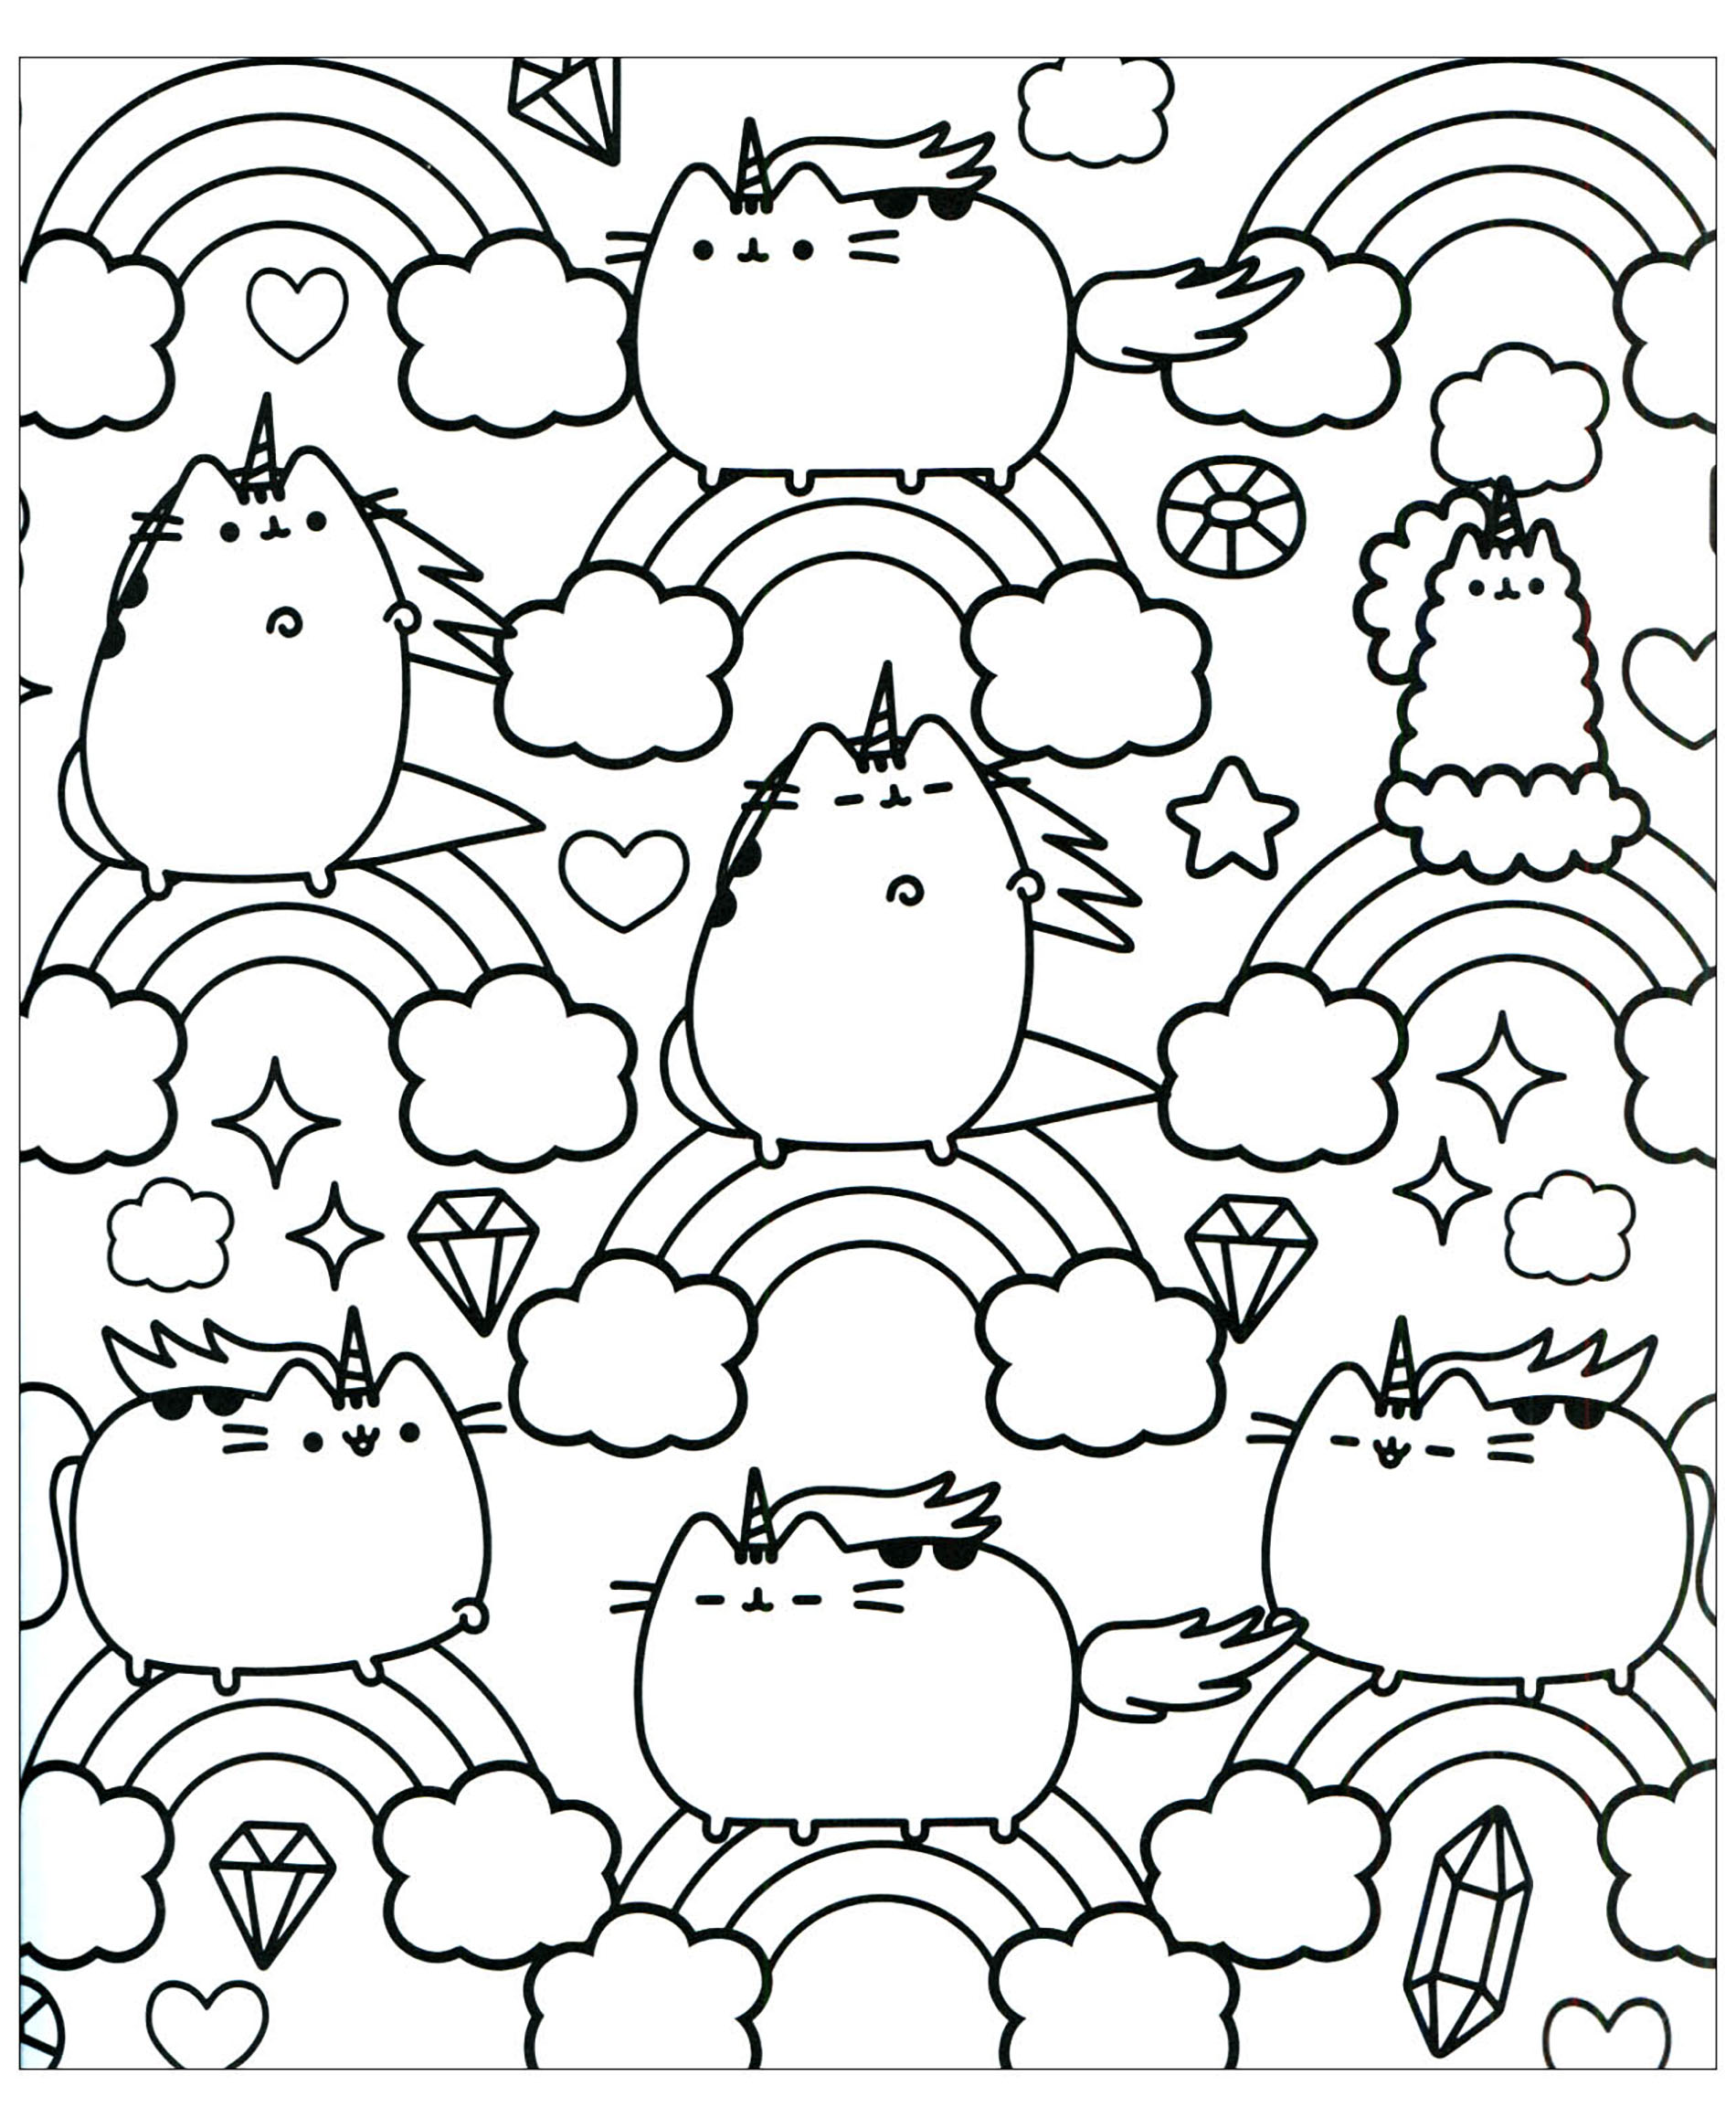 660 Top Coloring Pages Pusheen Images & Pictures In HD